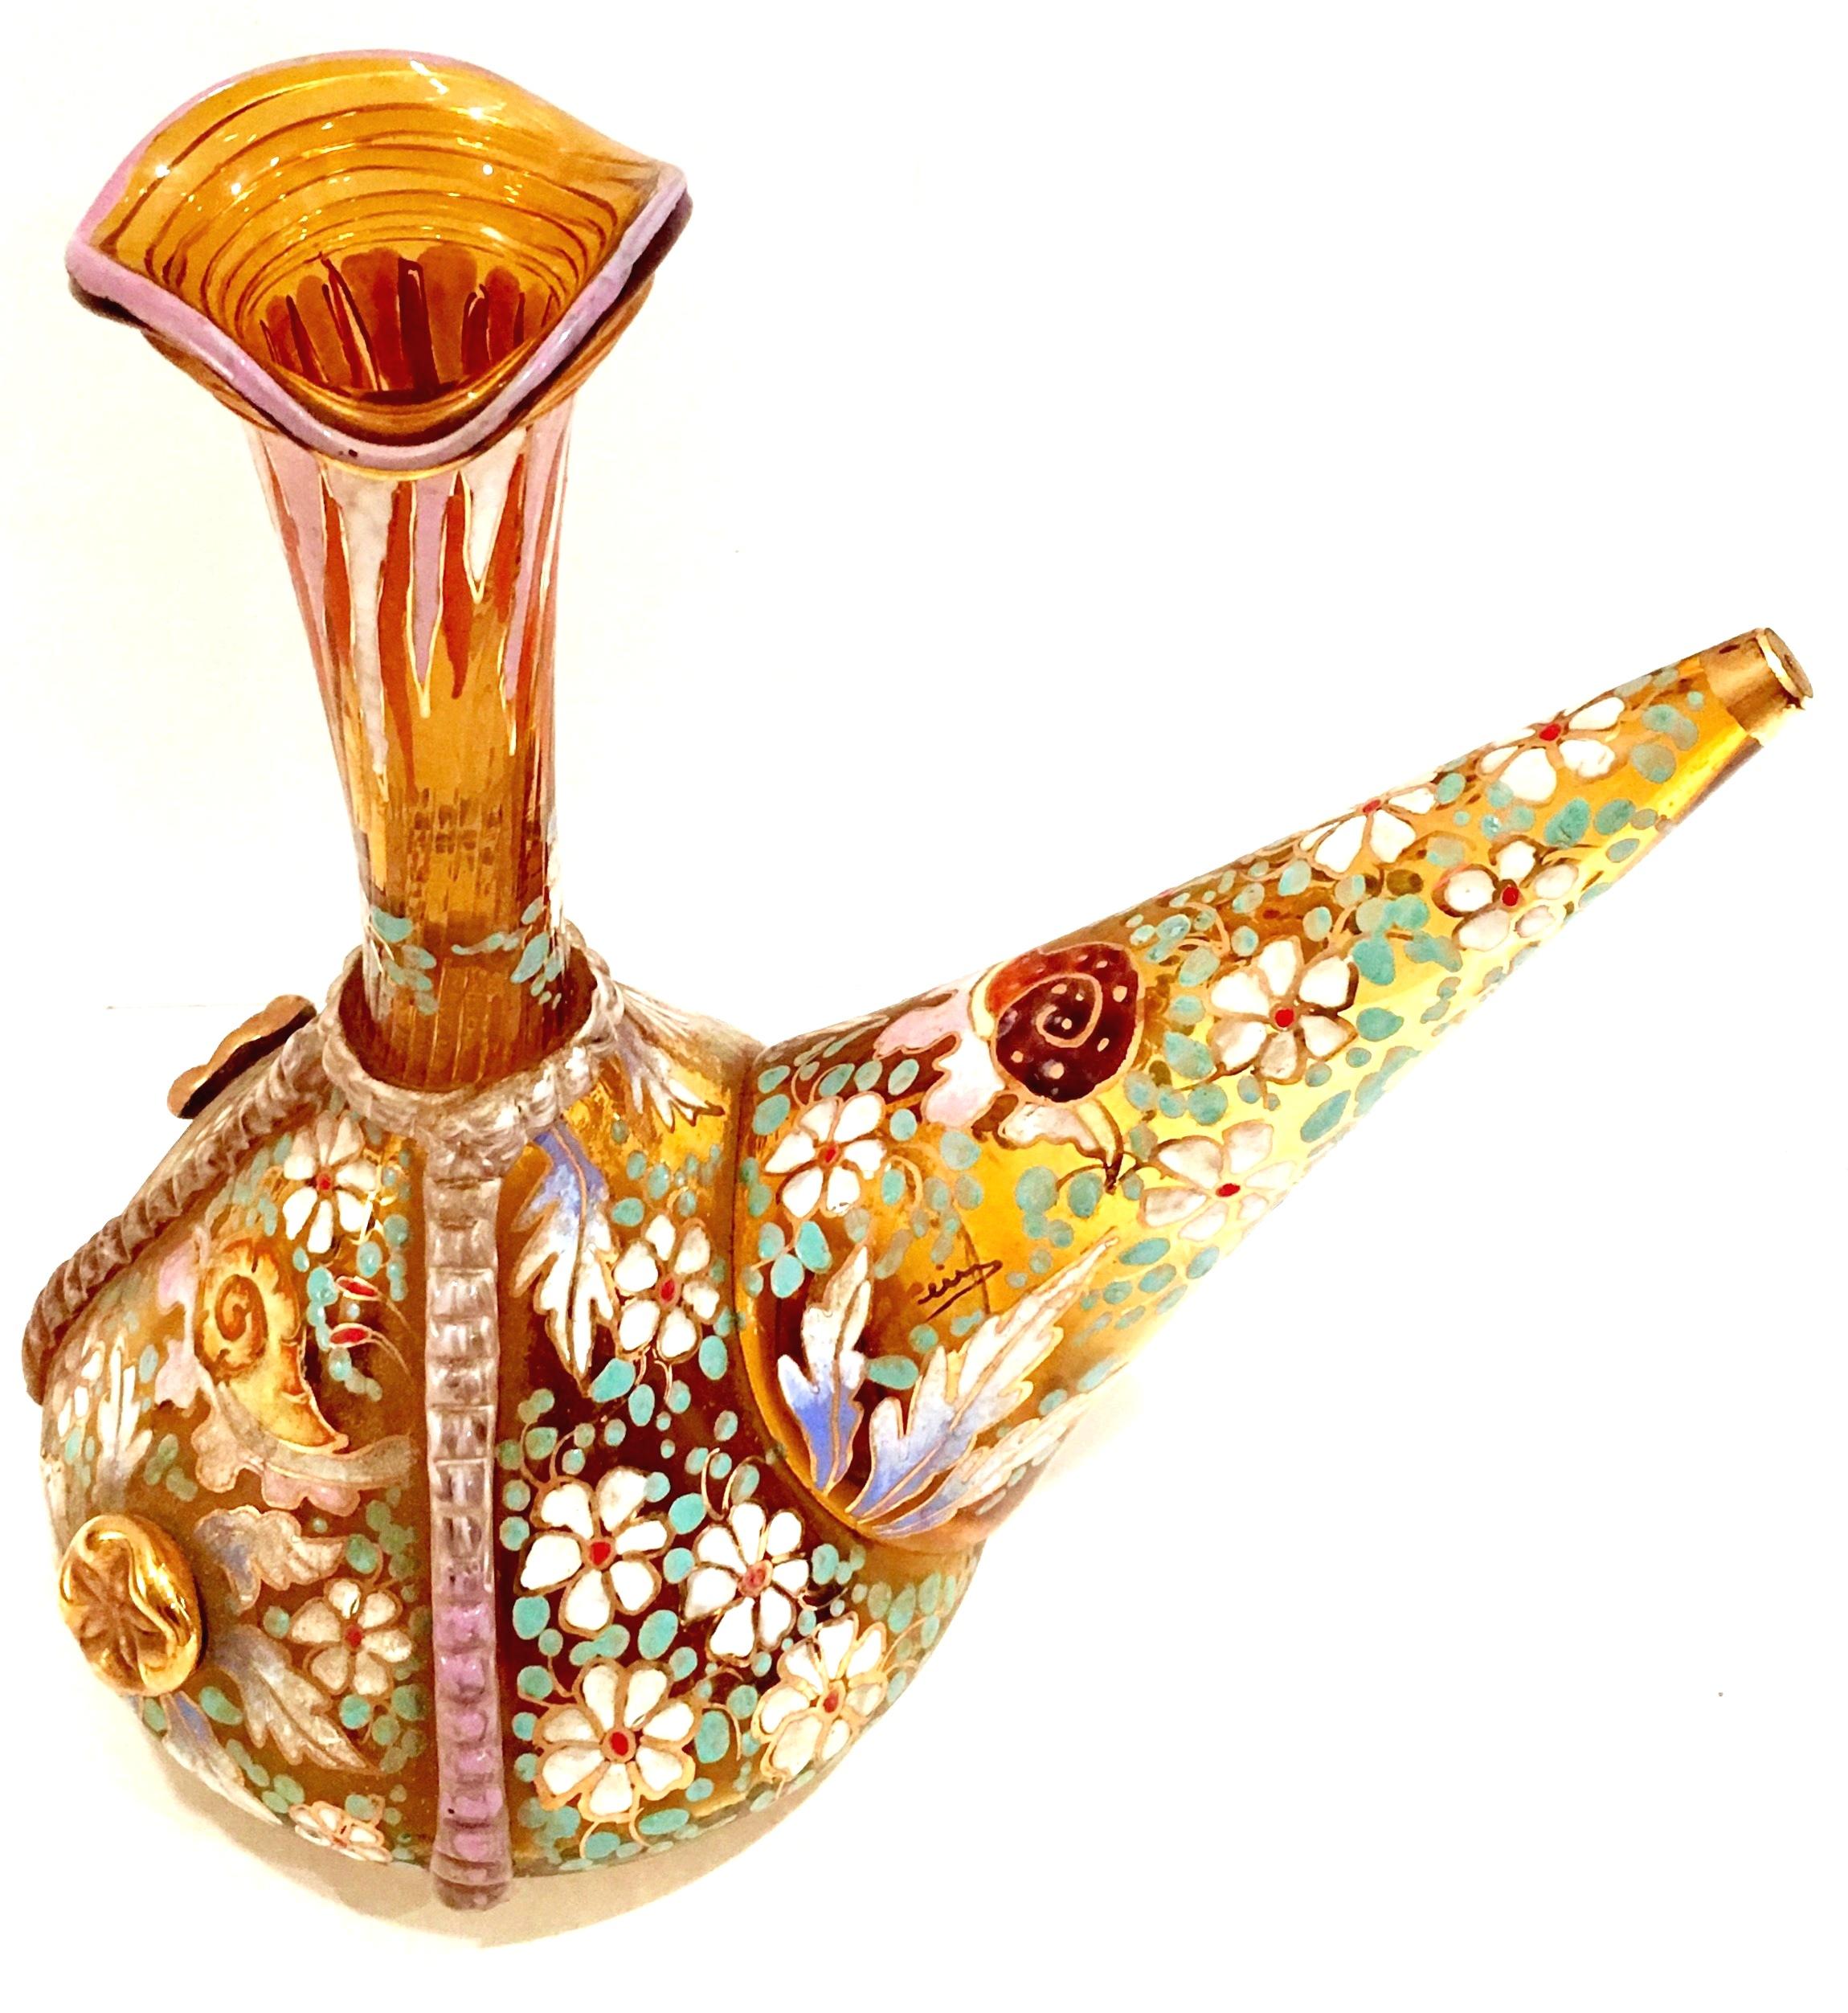 20th Century Spanish mouth blow glass moser style amber vino wine bottle. This incredibly detailed piece features hand applied raised enamel, crimped glass with gilt detail. The star fish medallions are hand applied gilt glass. Artist-signed in gold